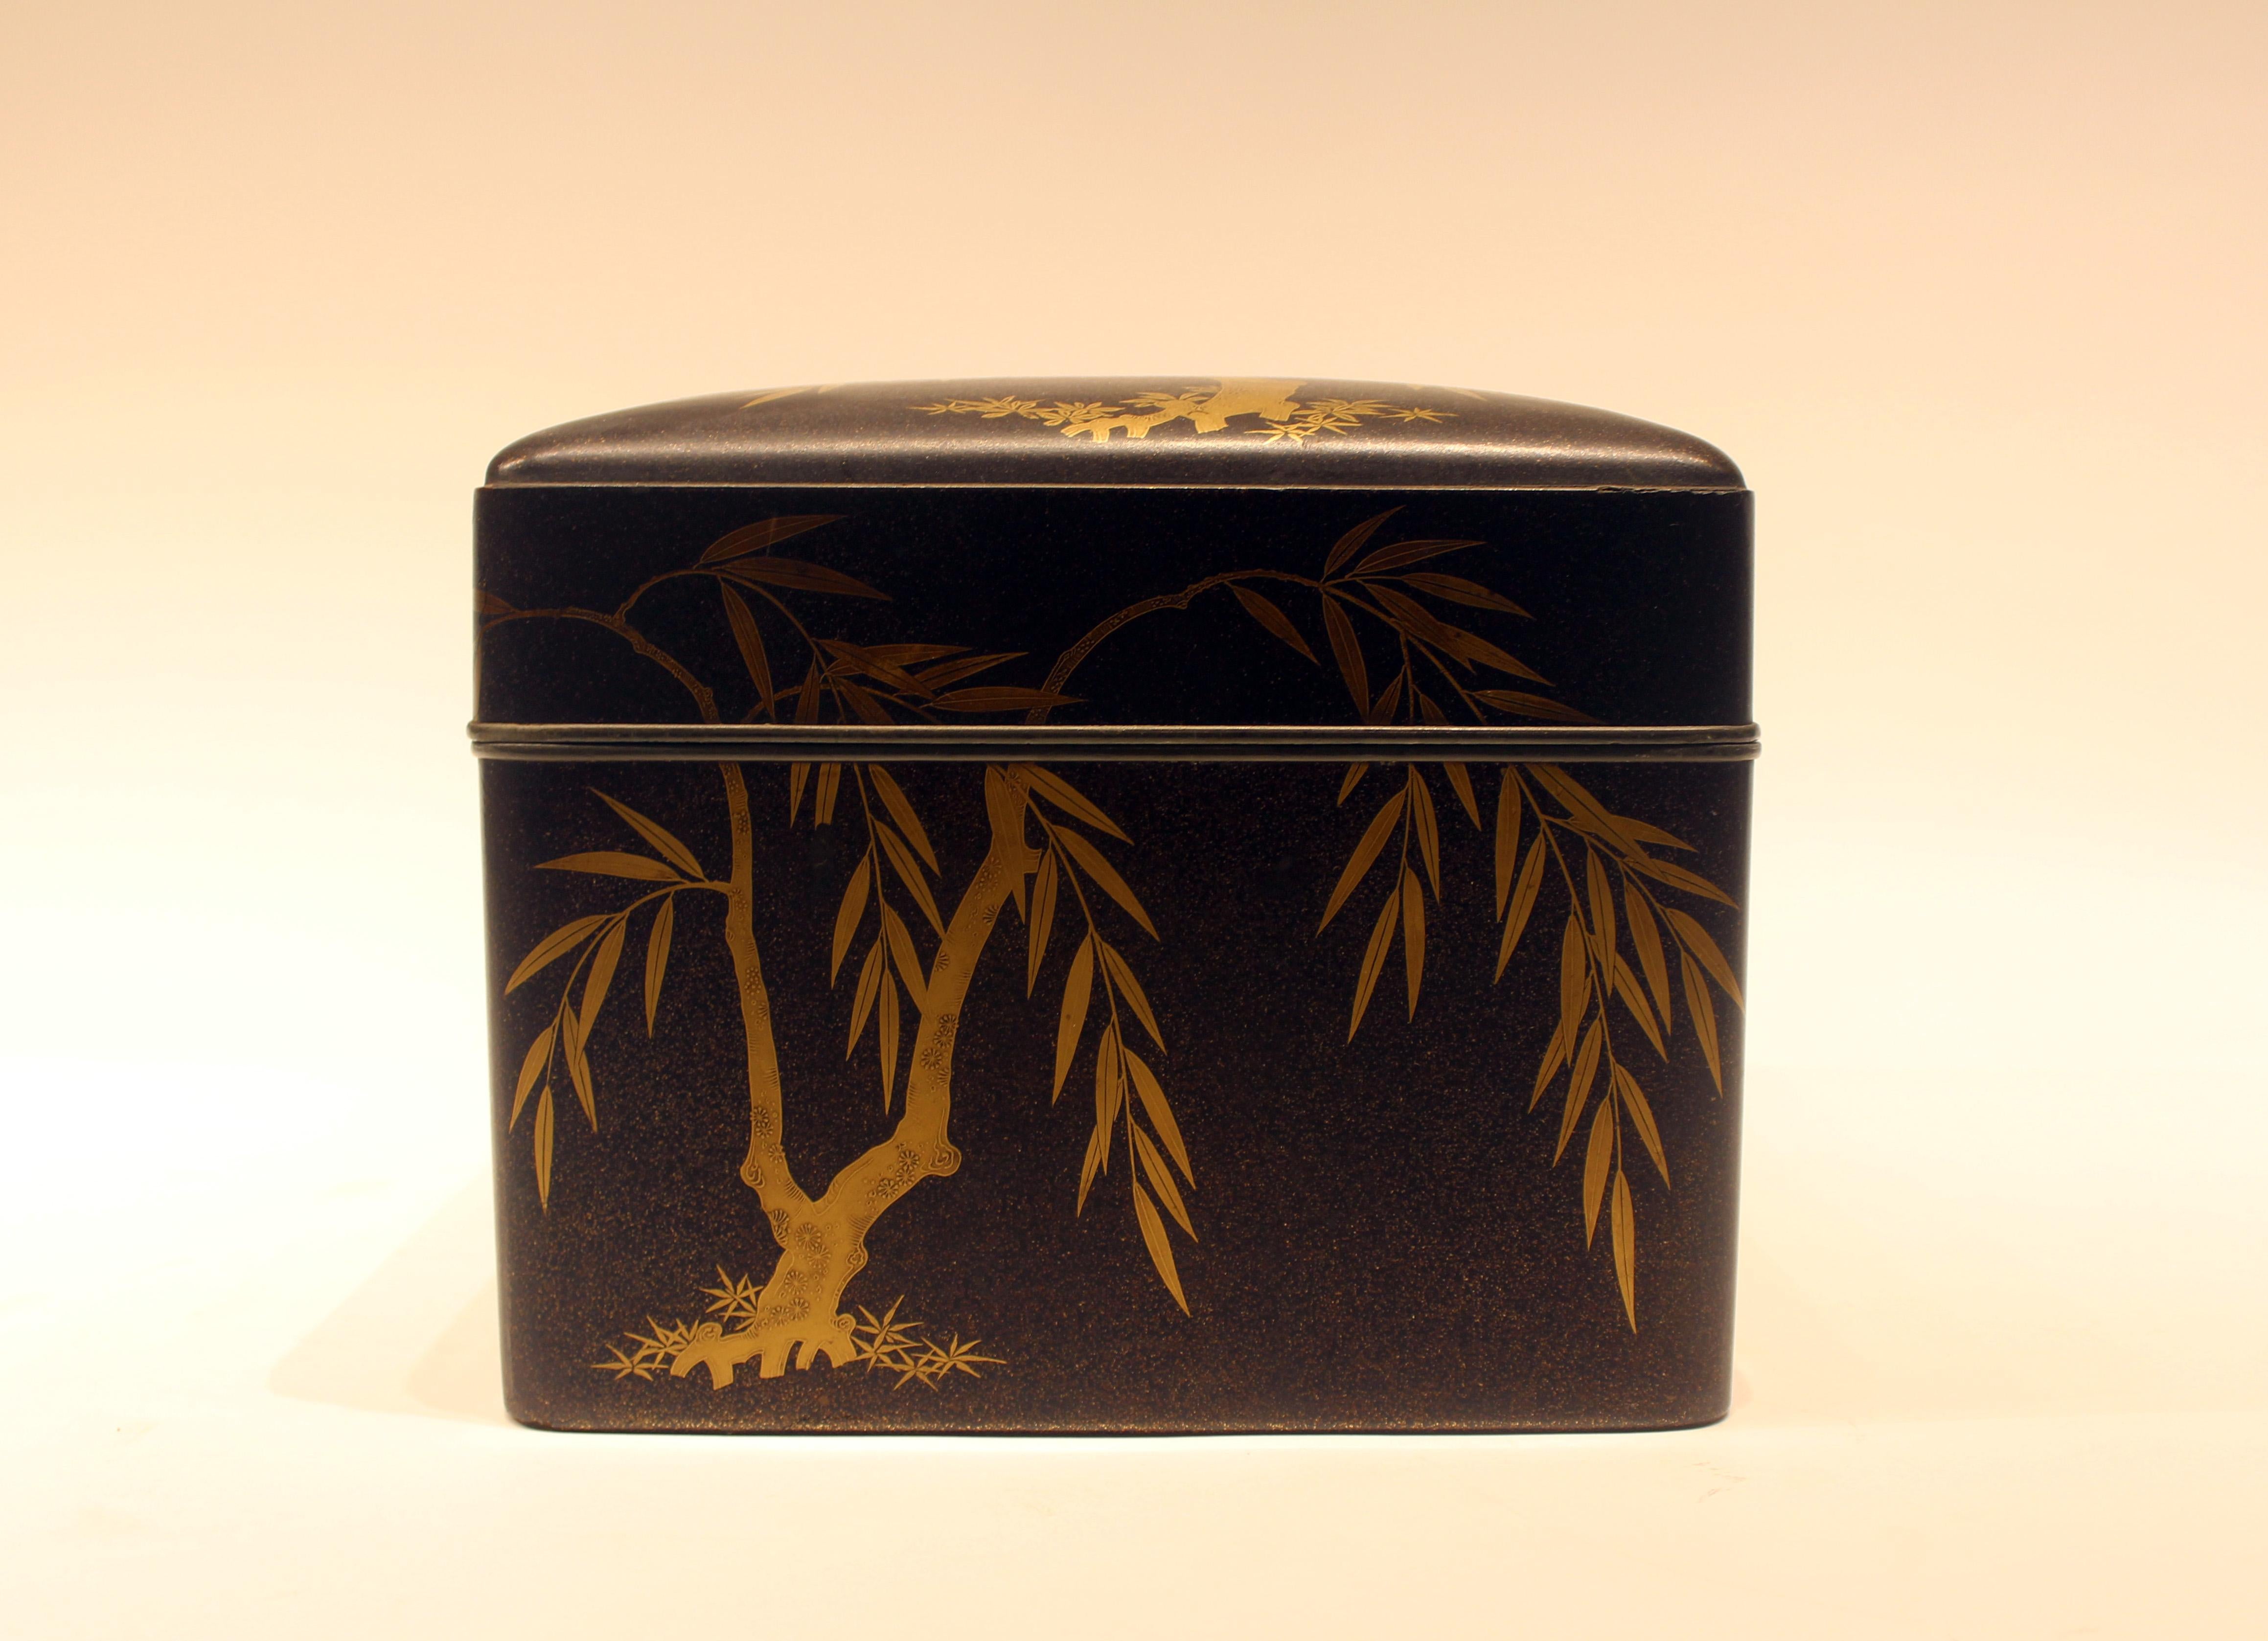 19th century Japanese lacquer document box with metal trim and gold accents.